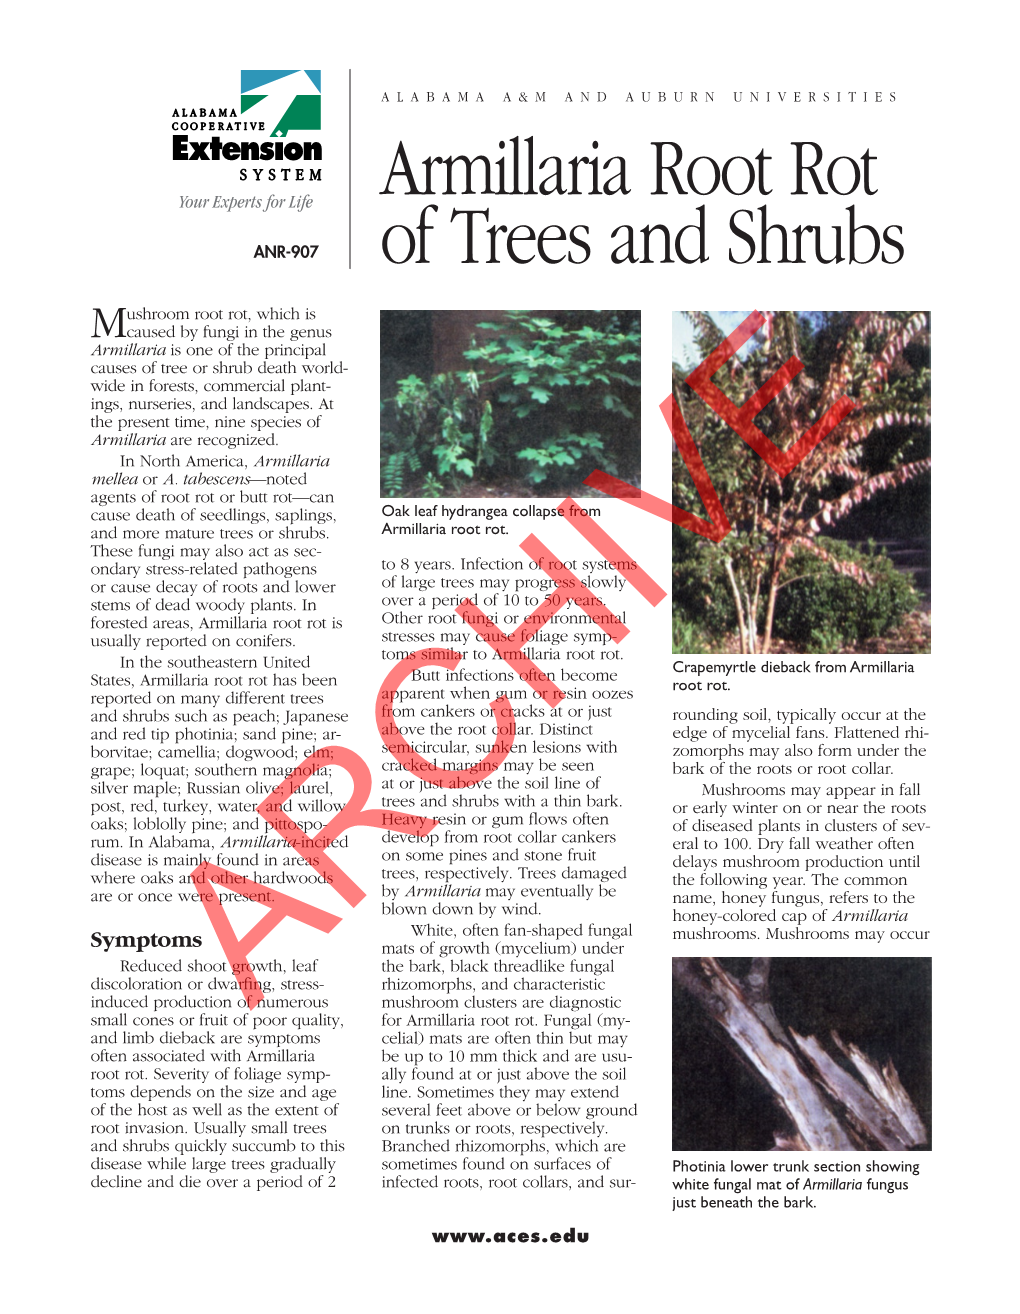 Armillaria Root Rot of Trees and Shrubs